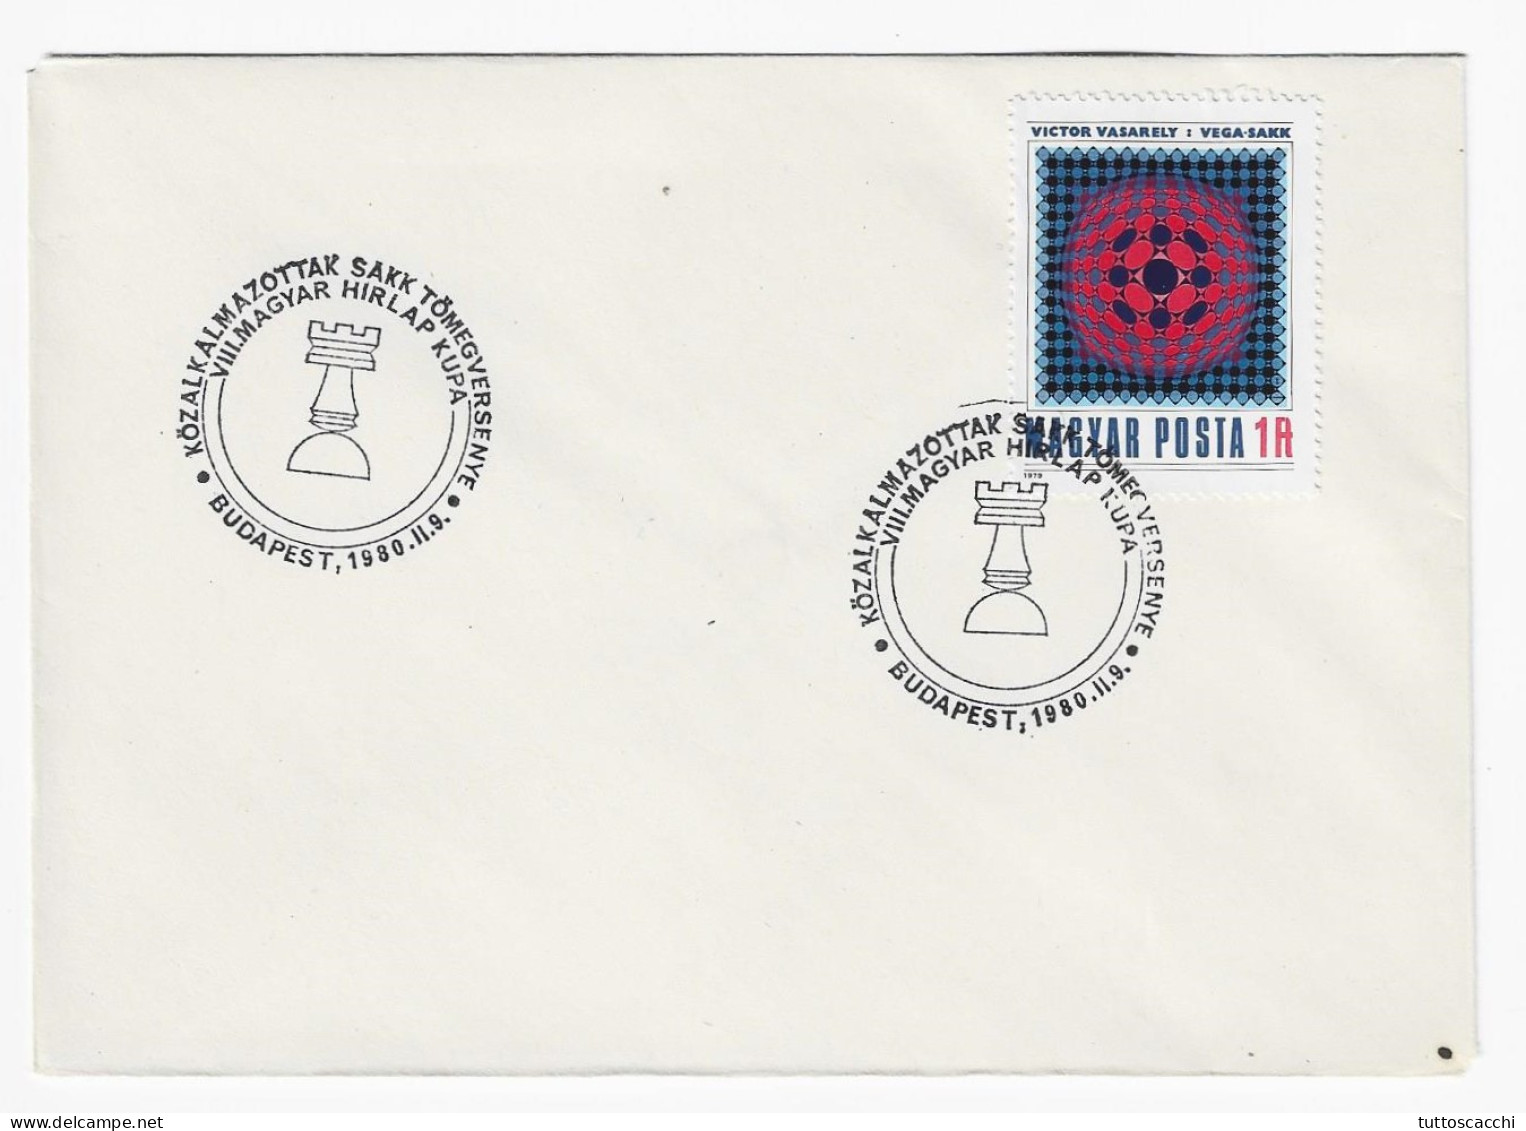 CHESS Hungary 1980, Budapest - Double Chess Cancel On Envelope, Chess Stamp - Chess